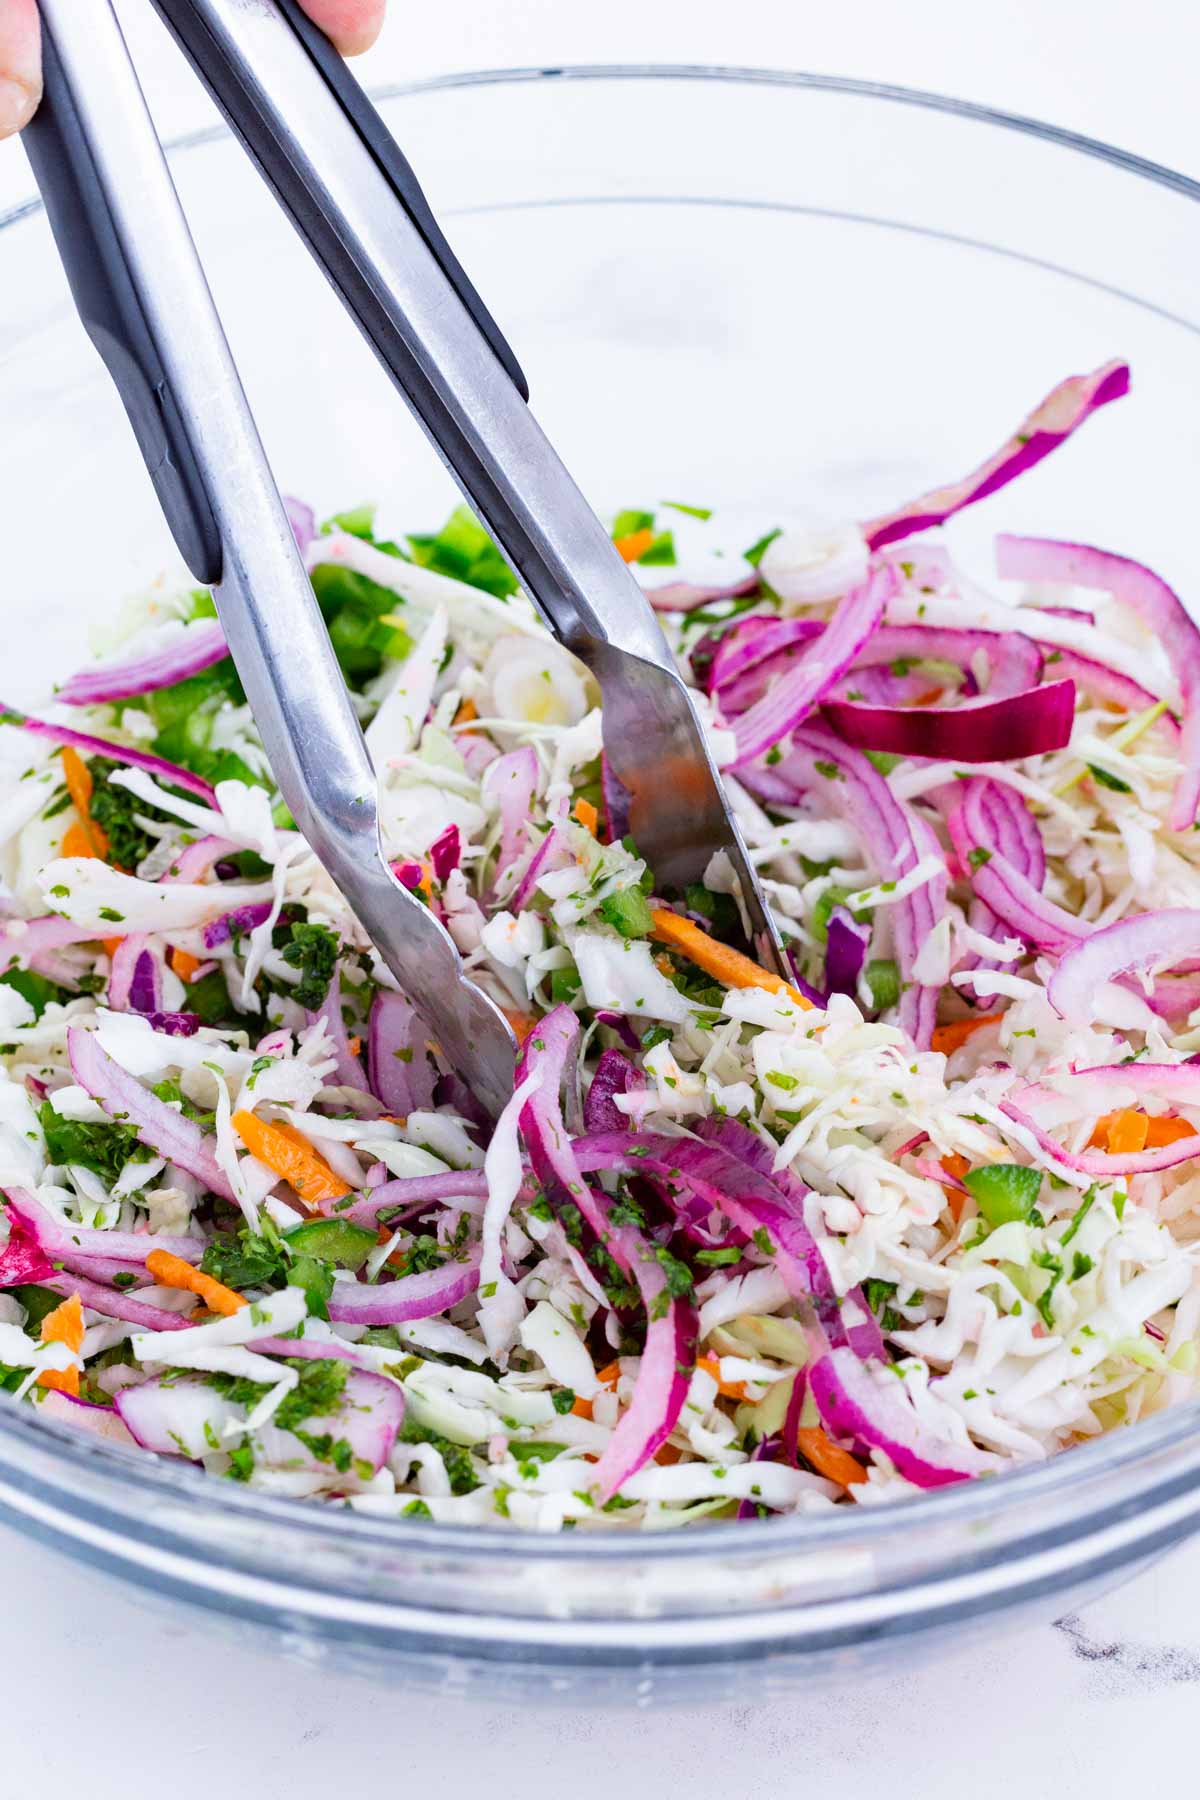 Fish slaw is mixed up.